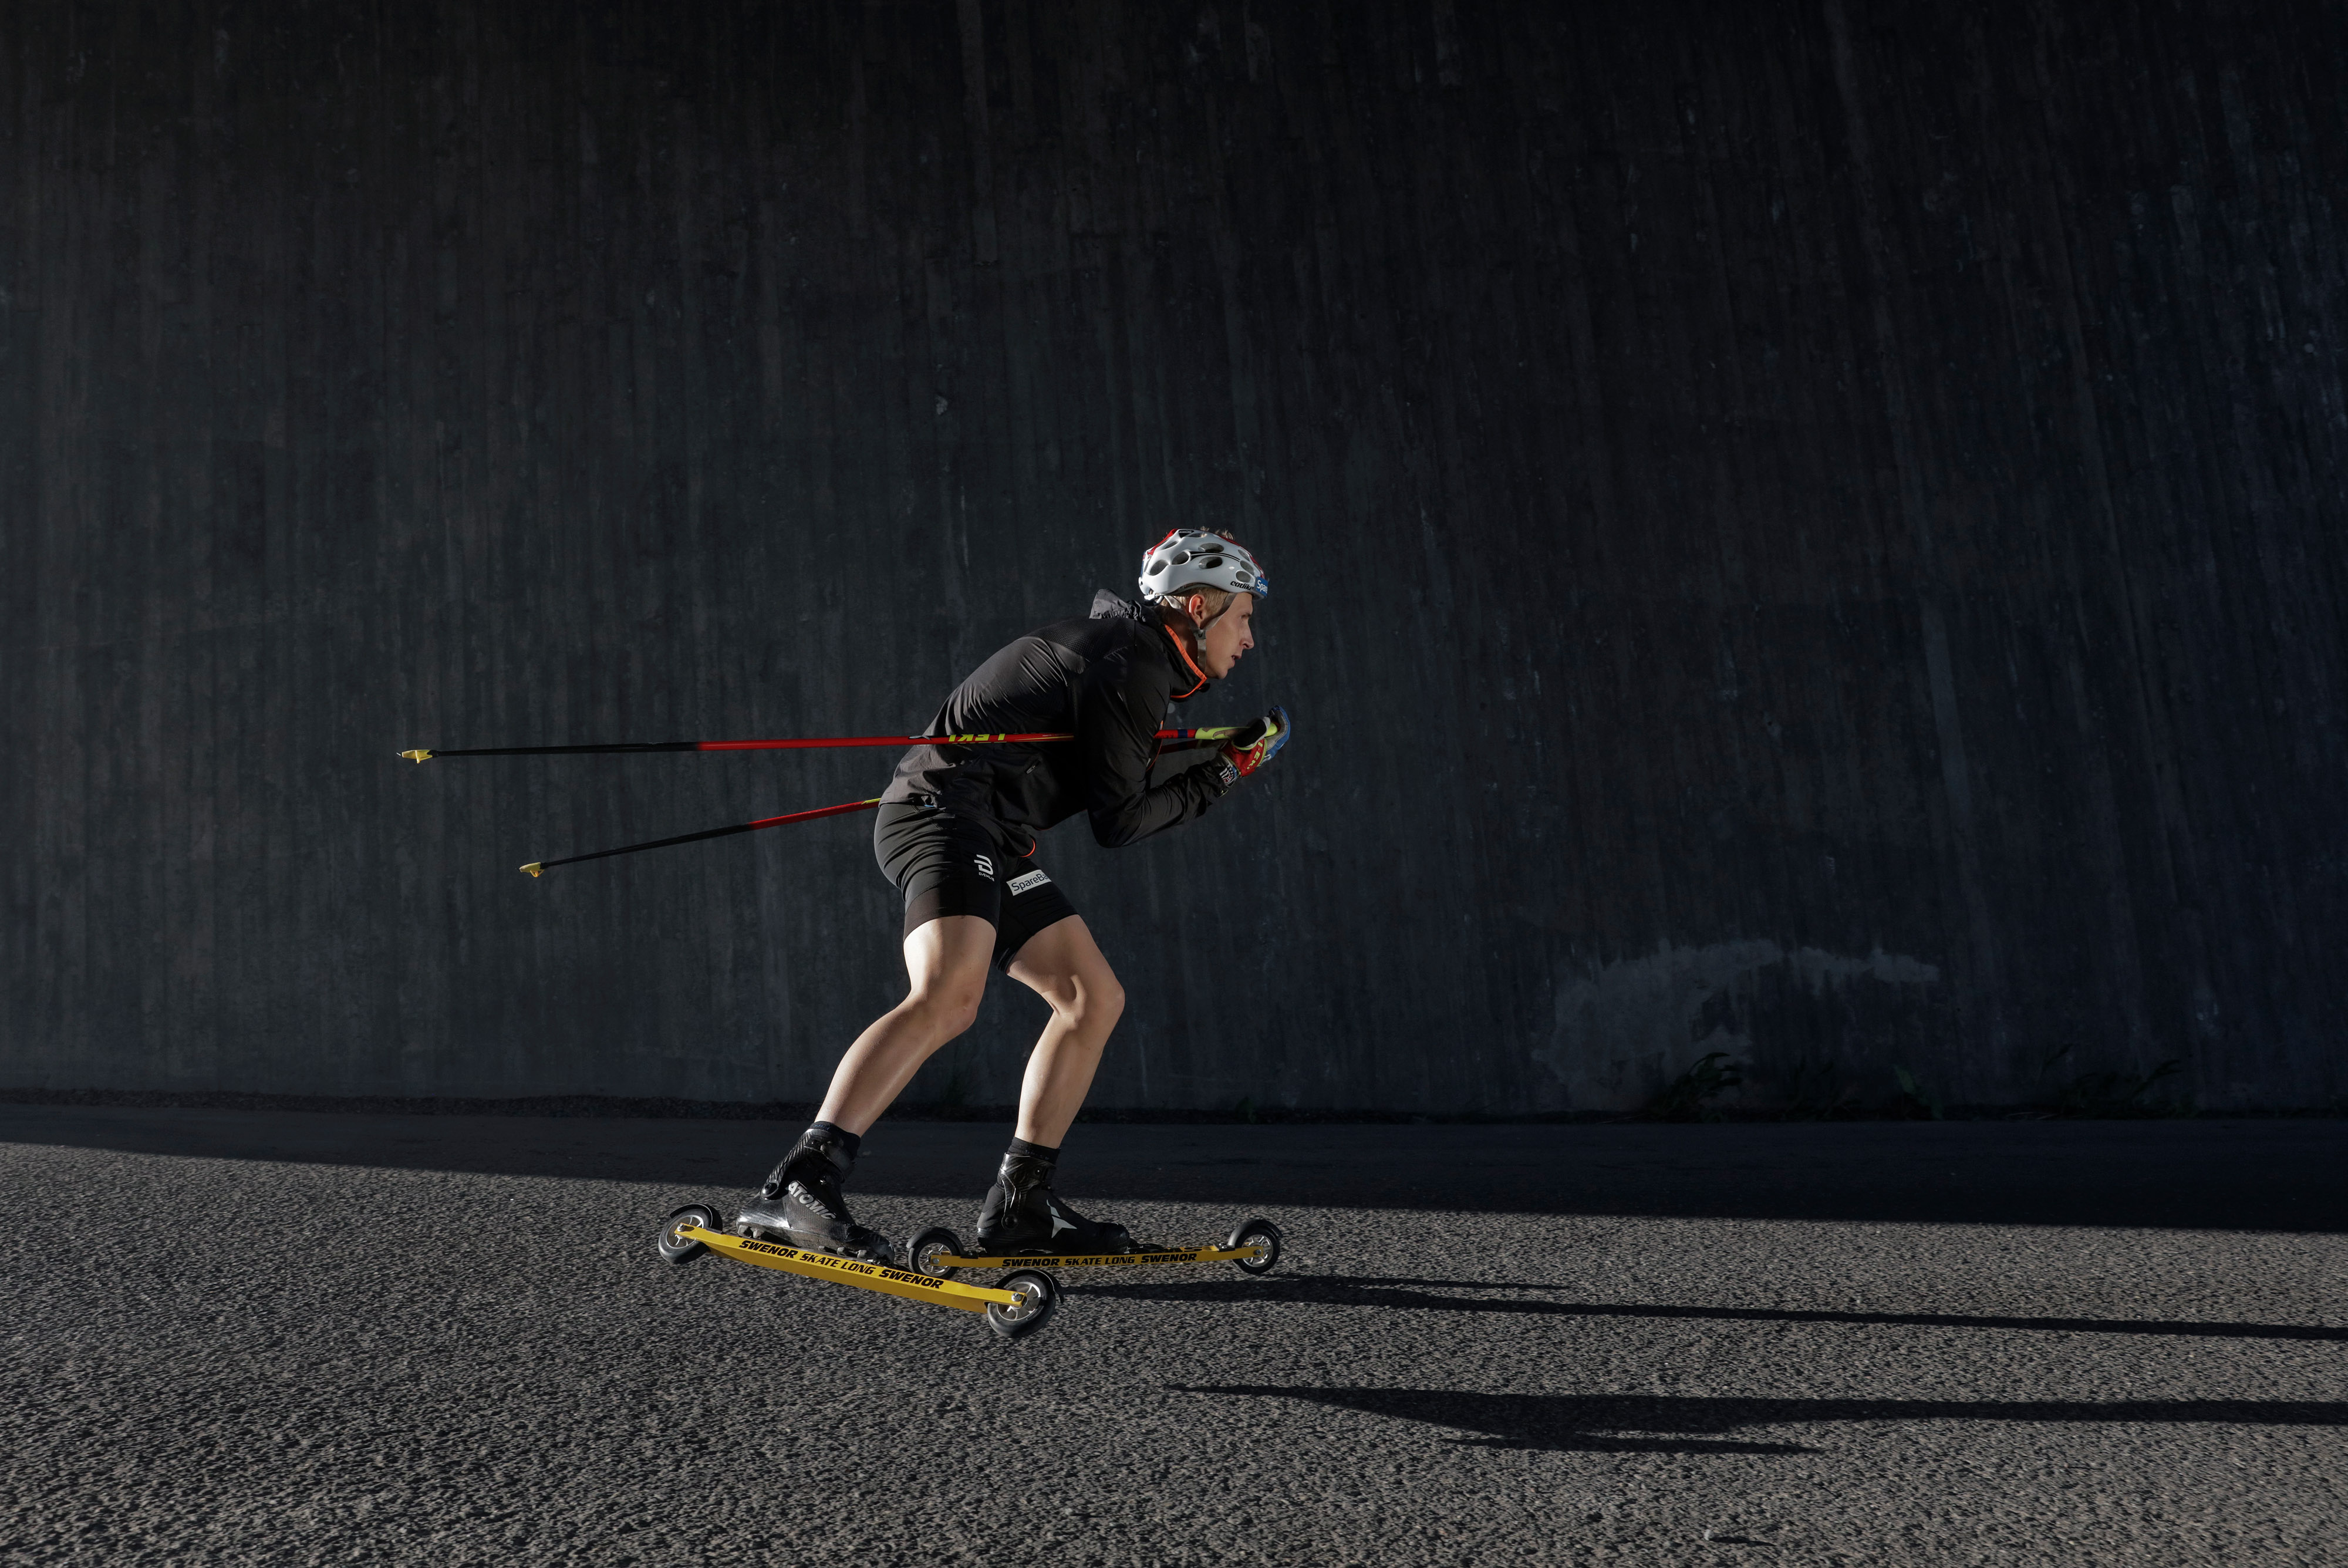 Skiwax Europe: The ultimate guide for Swenor rollerskis! How to choose the right one? [2022]